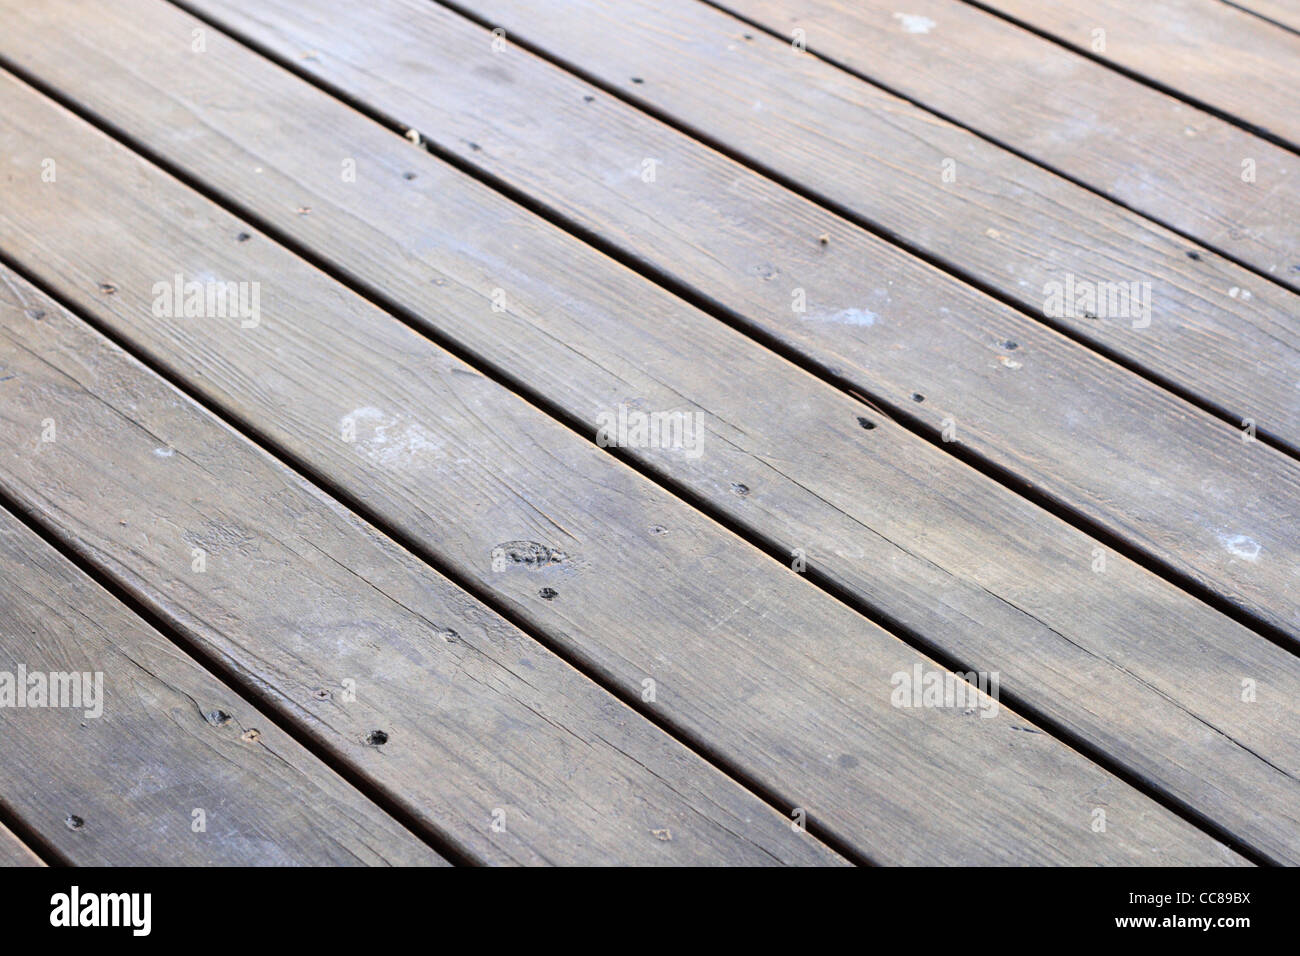 dark cracked wooden deck surface with screwed Stock Photo